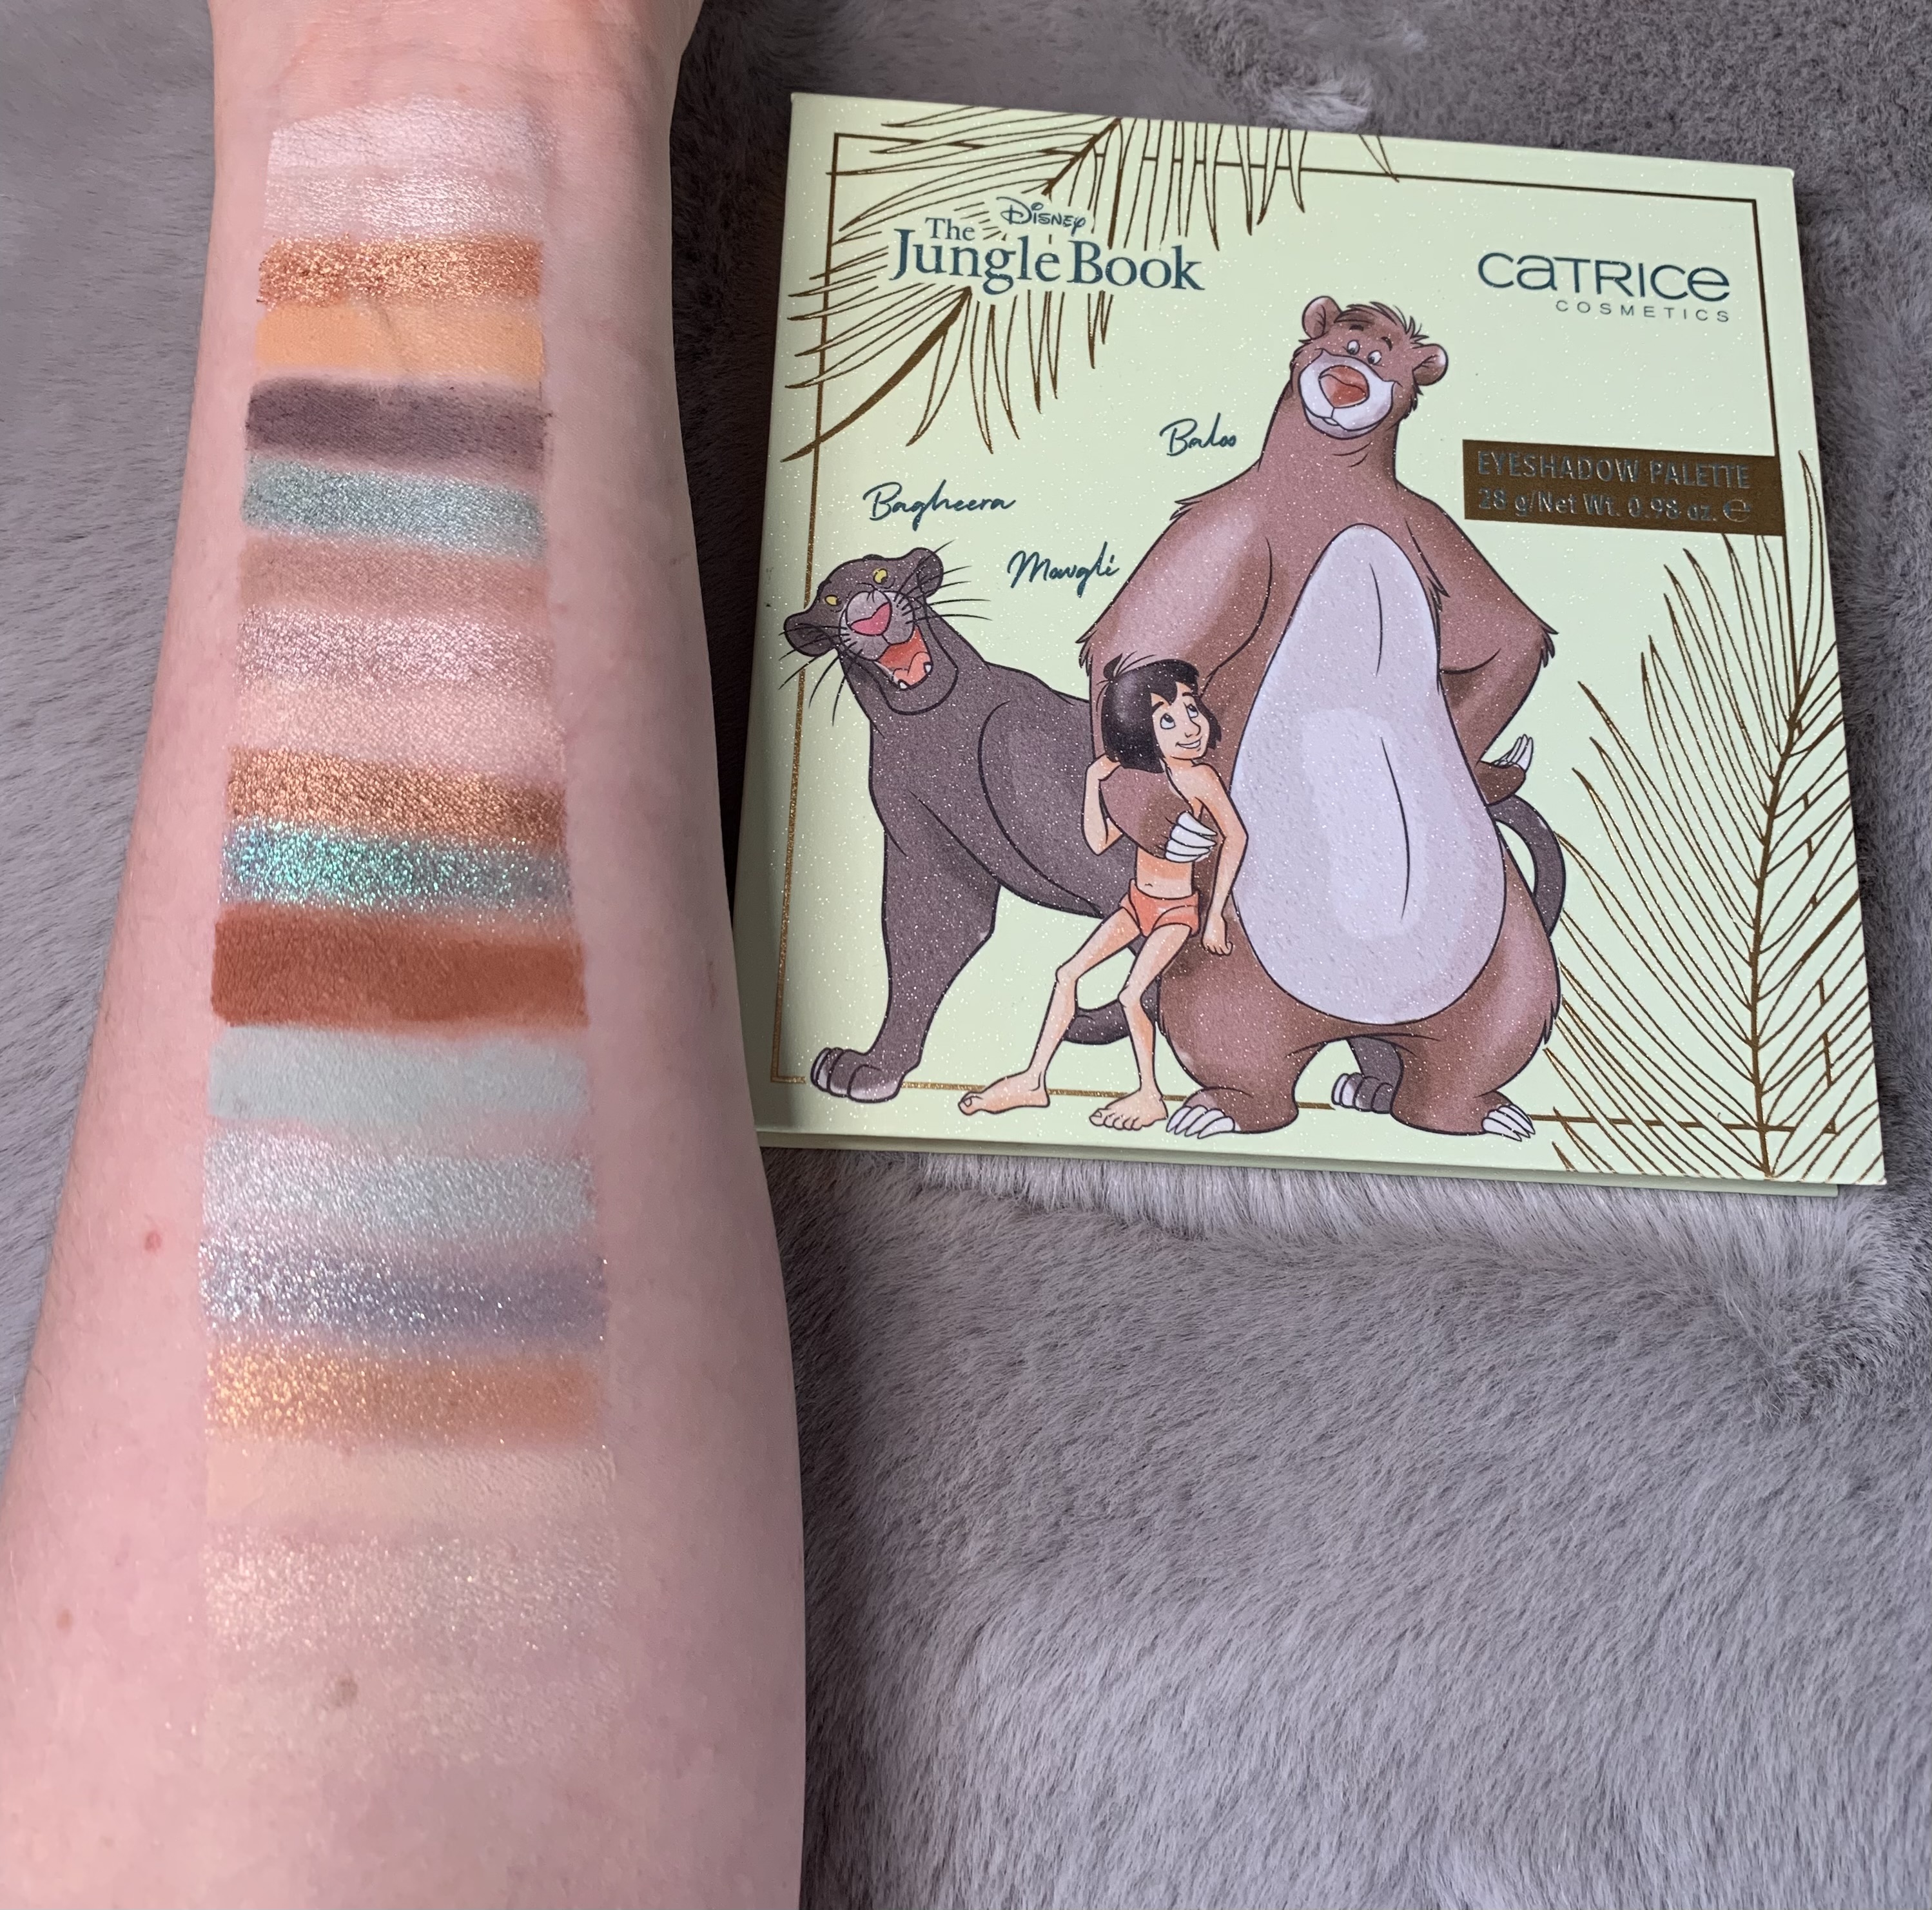 Catrice Disney The Jungle Book Eyeshadow Palette 020 Stay In The Jungle